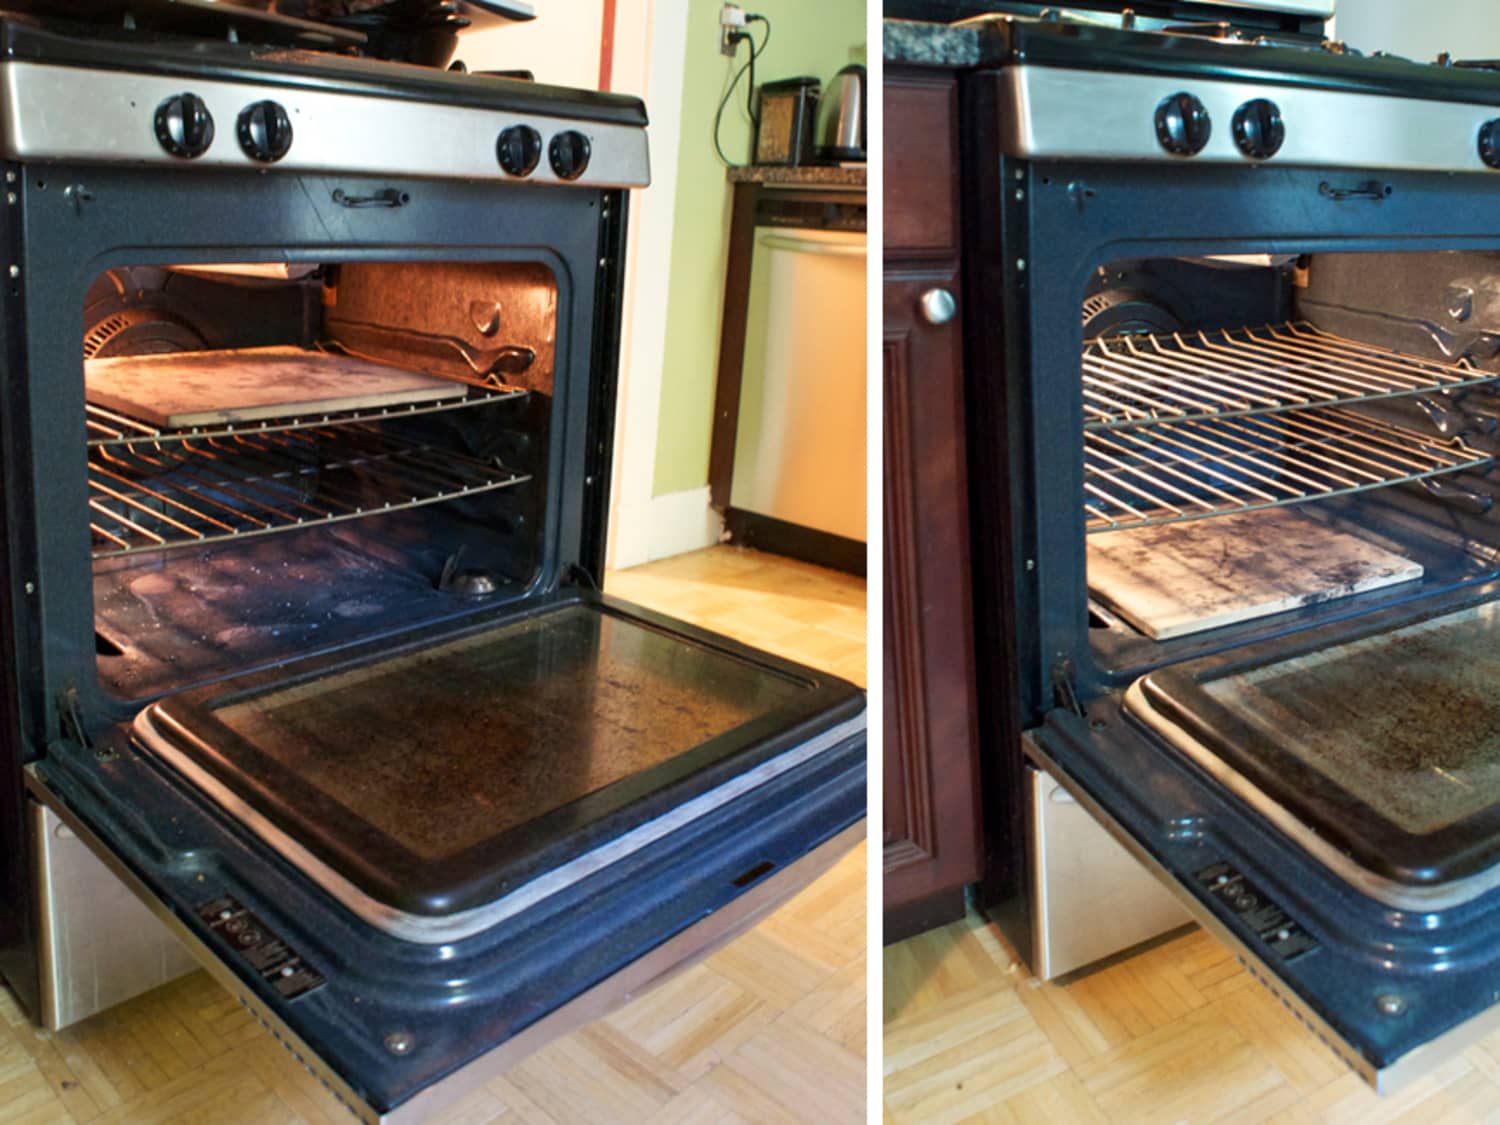 How To Clean Dirty Oven Racks So They'll Look Brand New